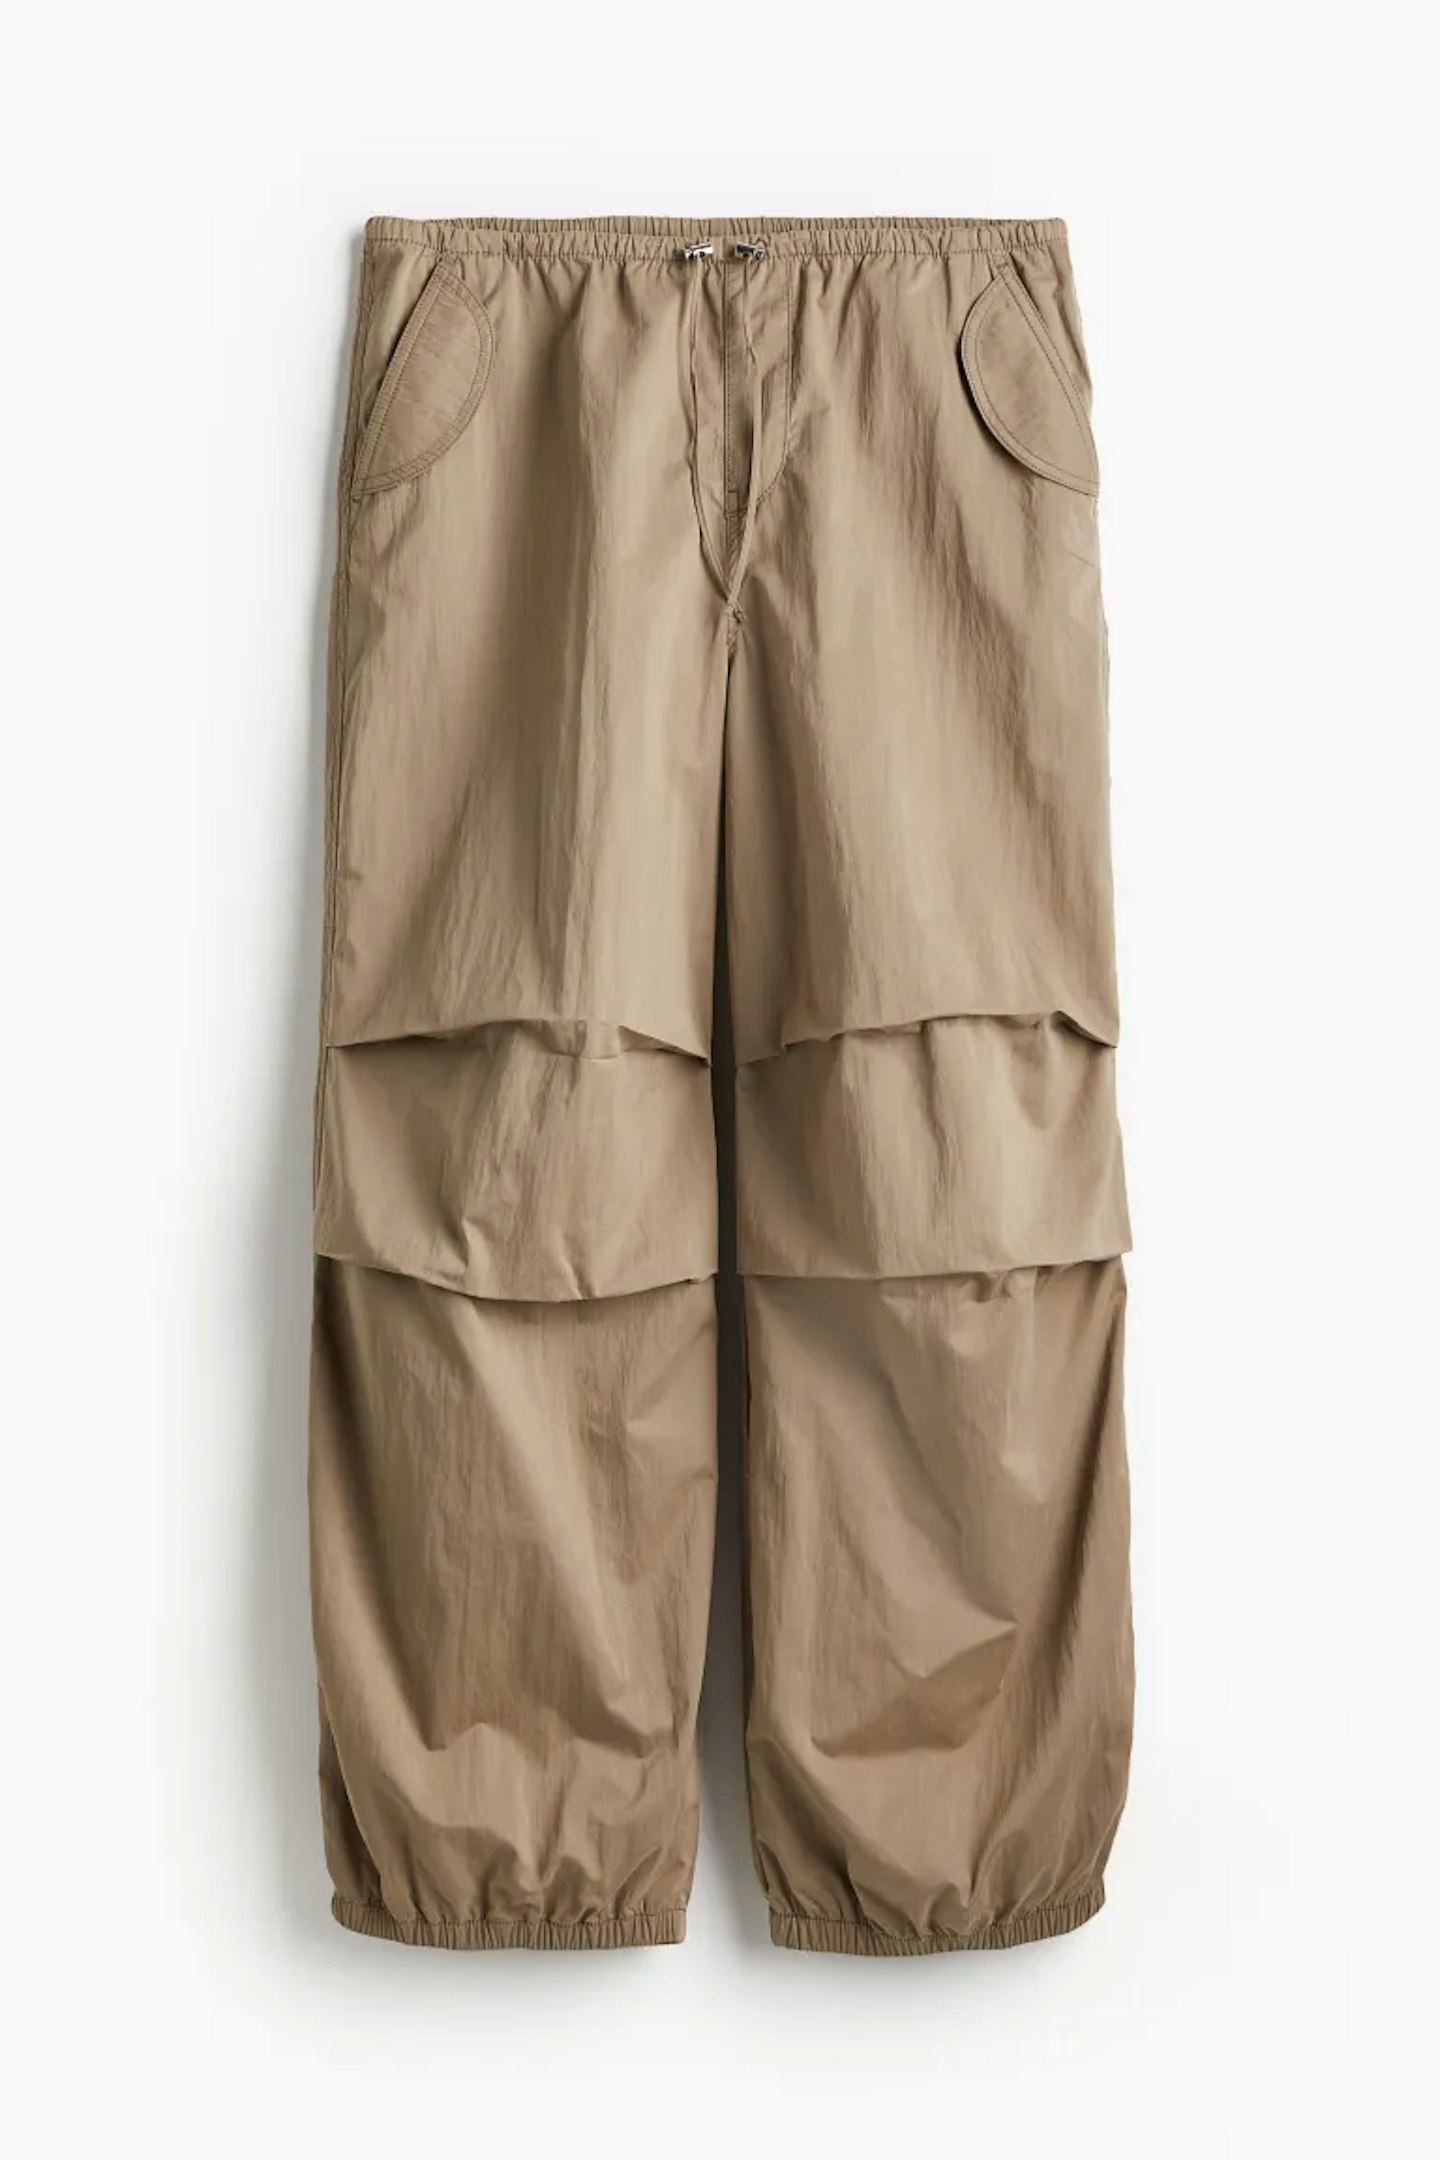 Monday - H&M trousers